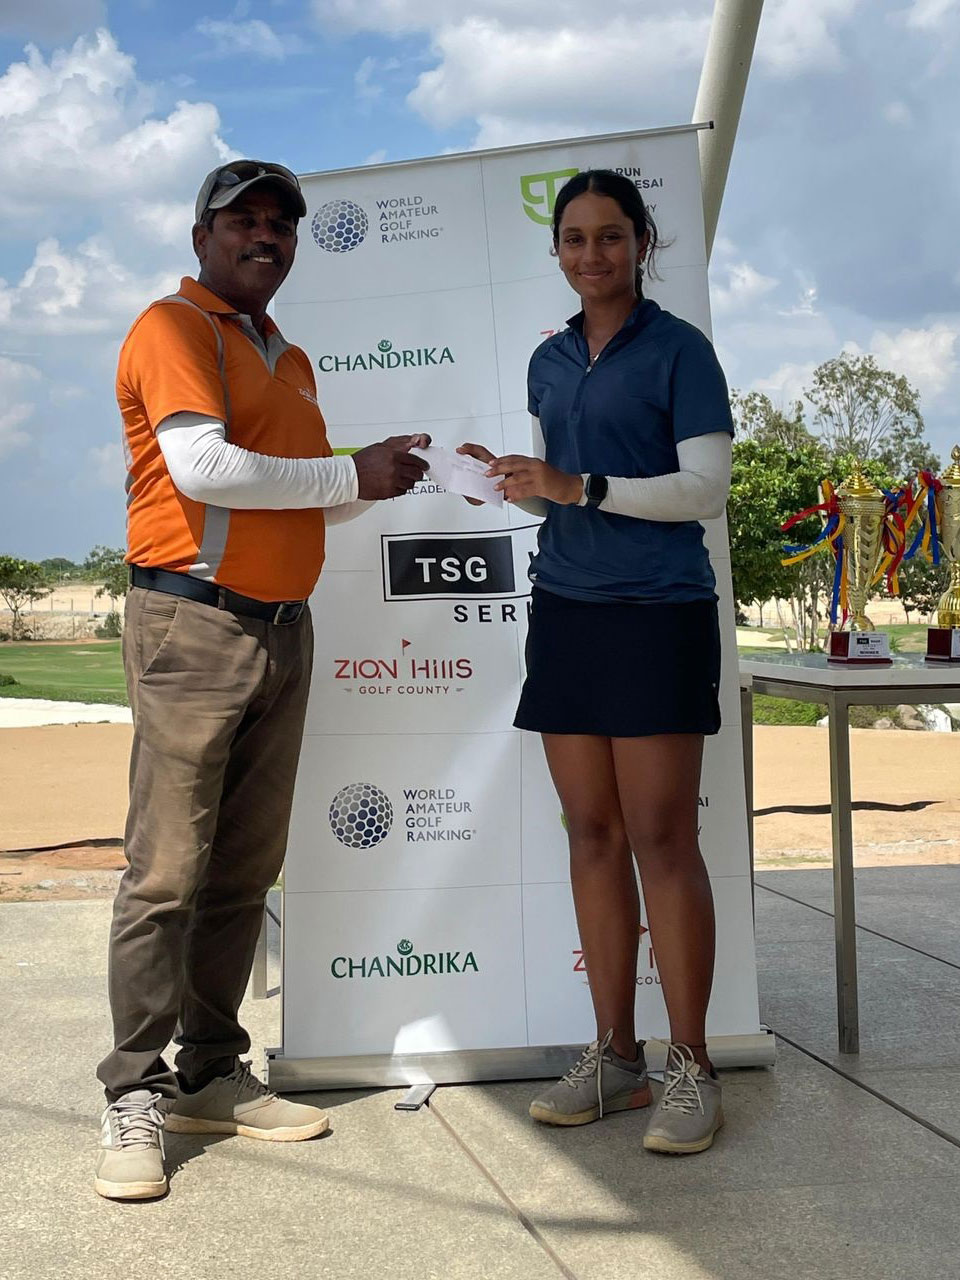 Manvi Singhania finished 3rd in the open girls category at the TSG WAGR Series held at Zion Hills, Bangalore.